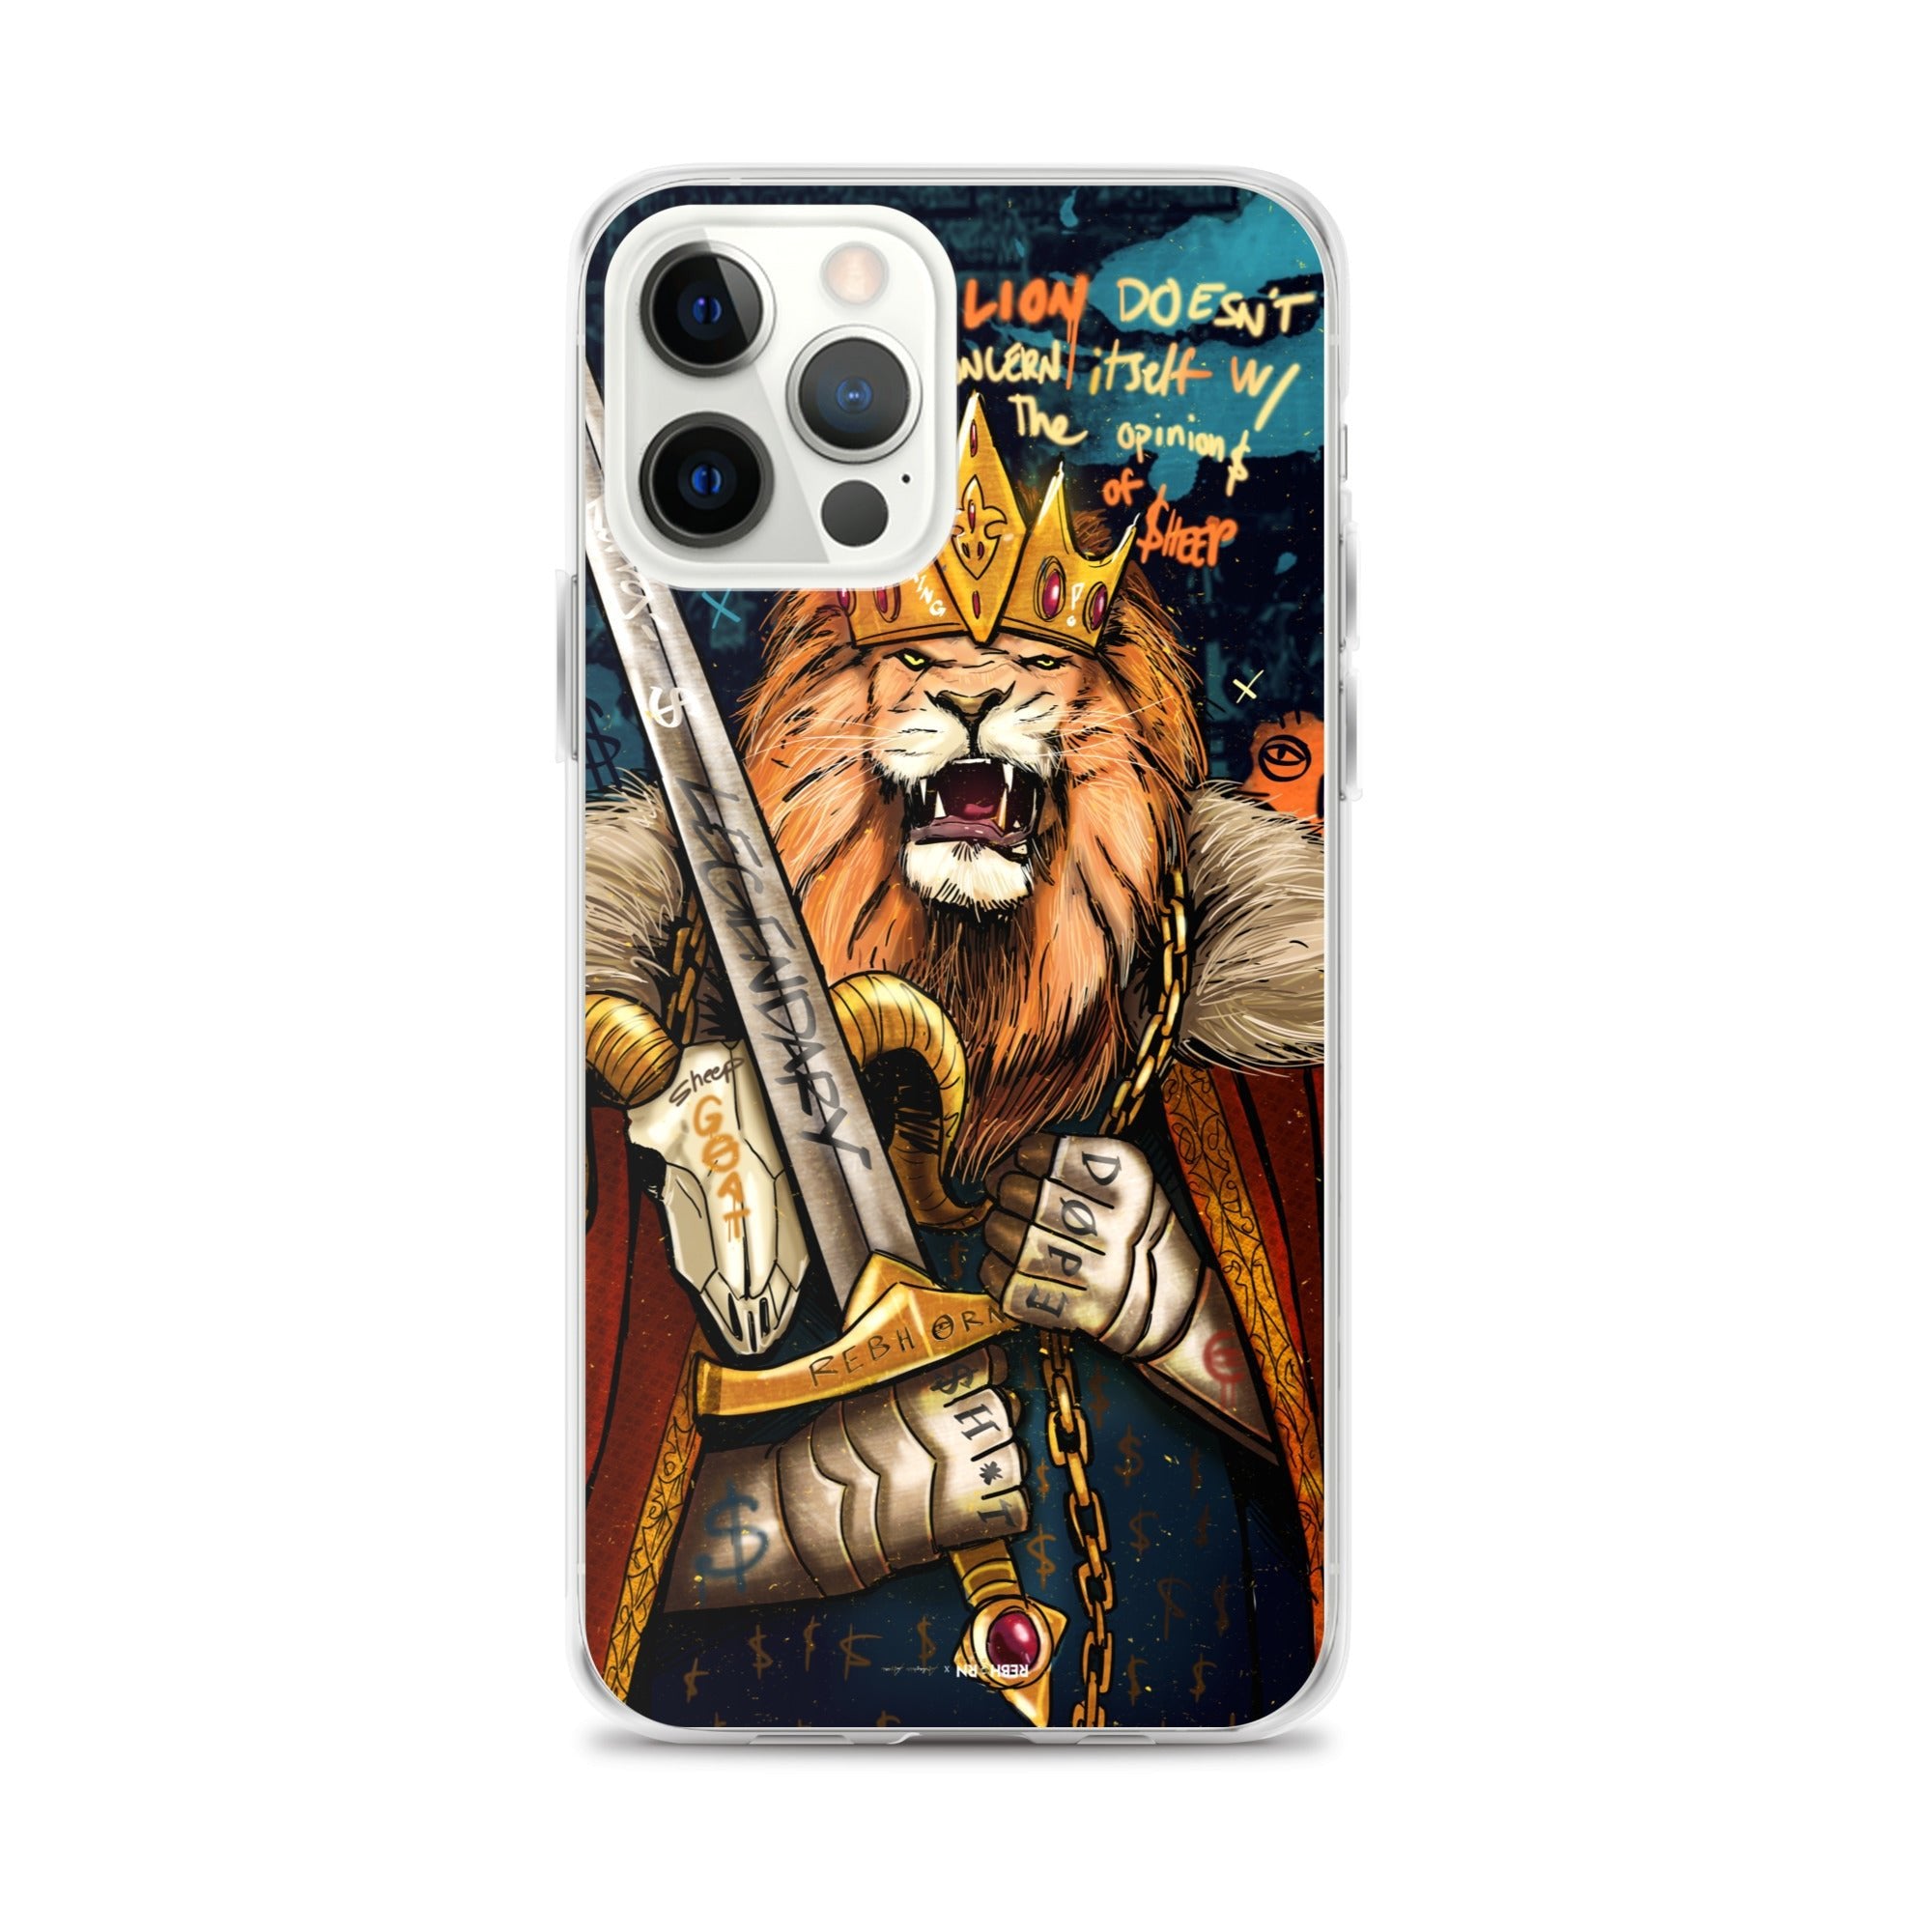 A Lion Doesn't Concern Itself with the Opinions of Sheep iPhone Case - REBHORN DESIGN